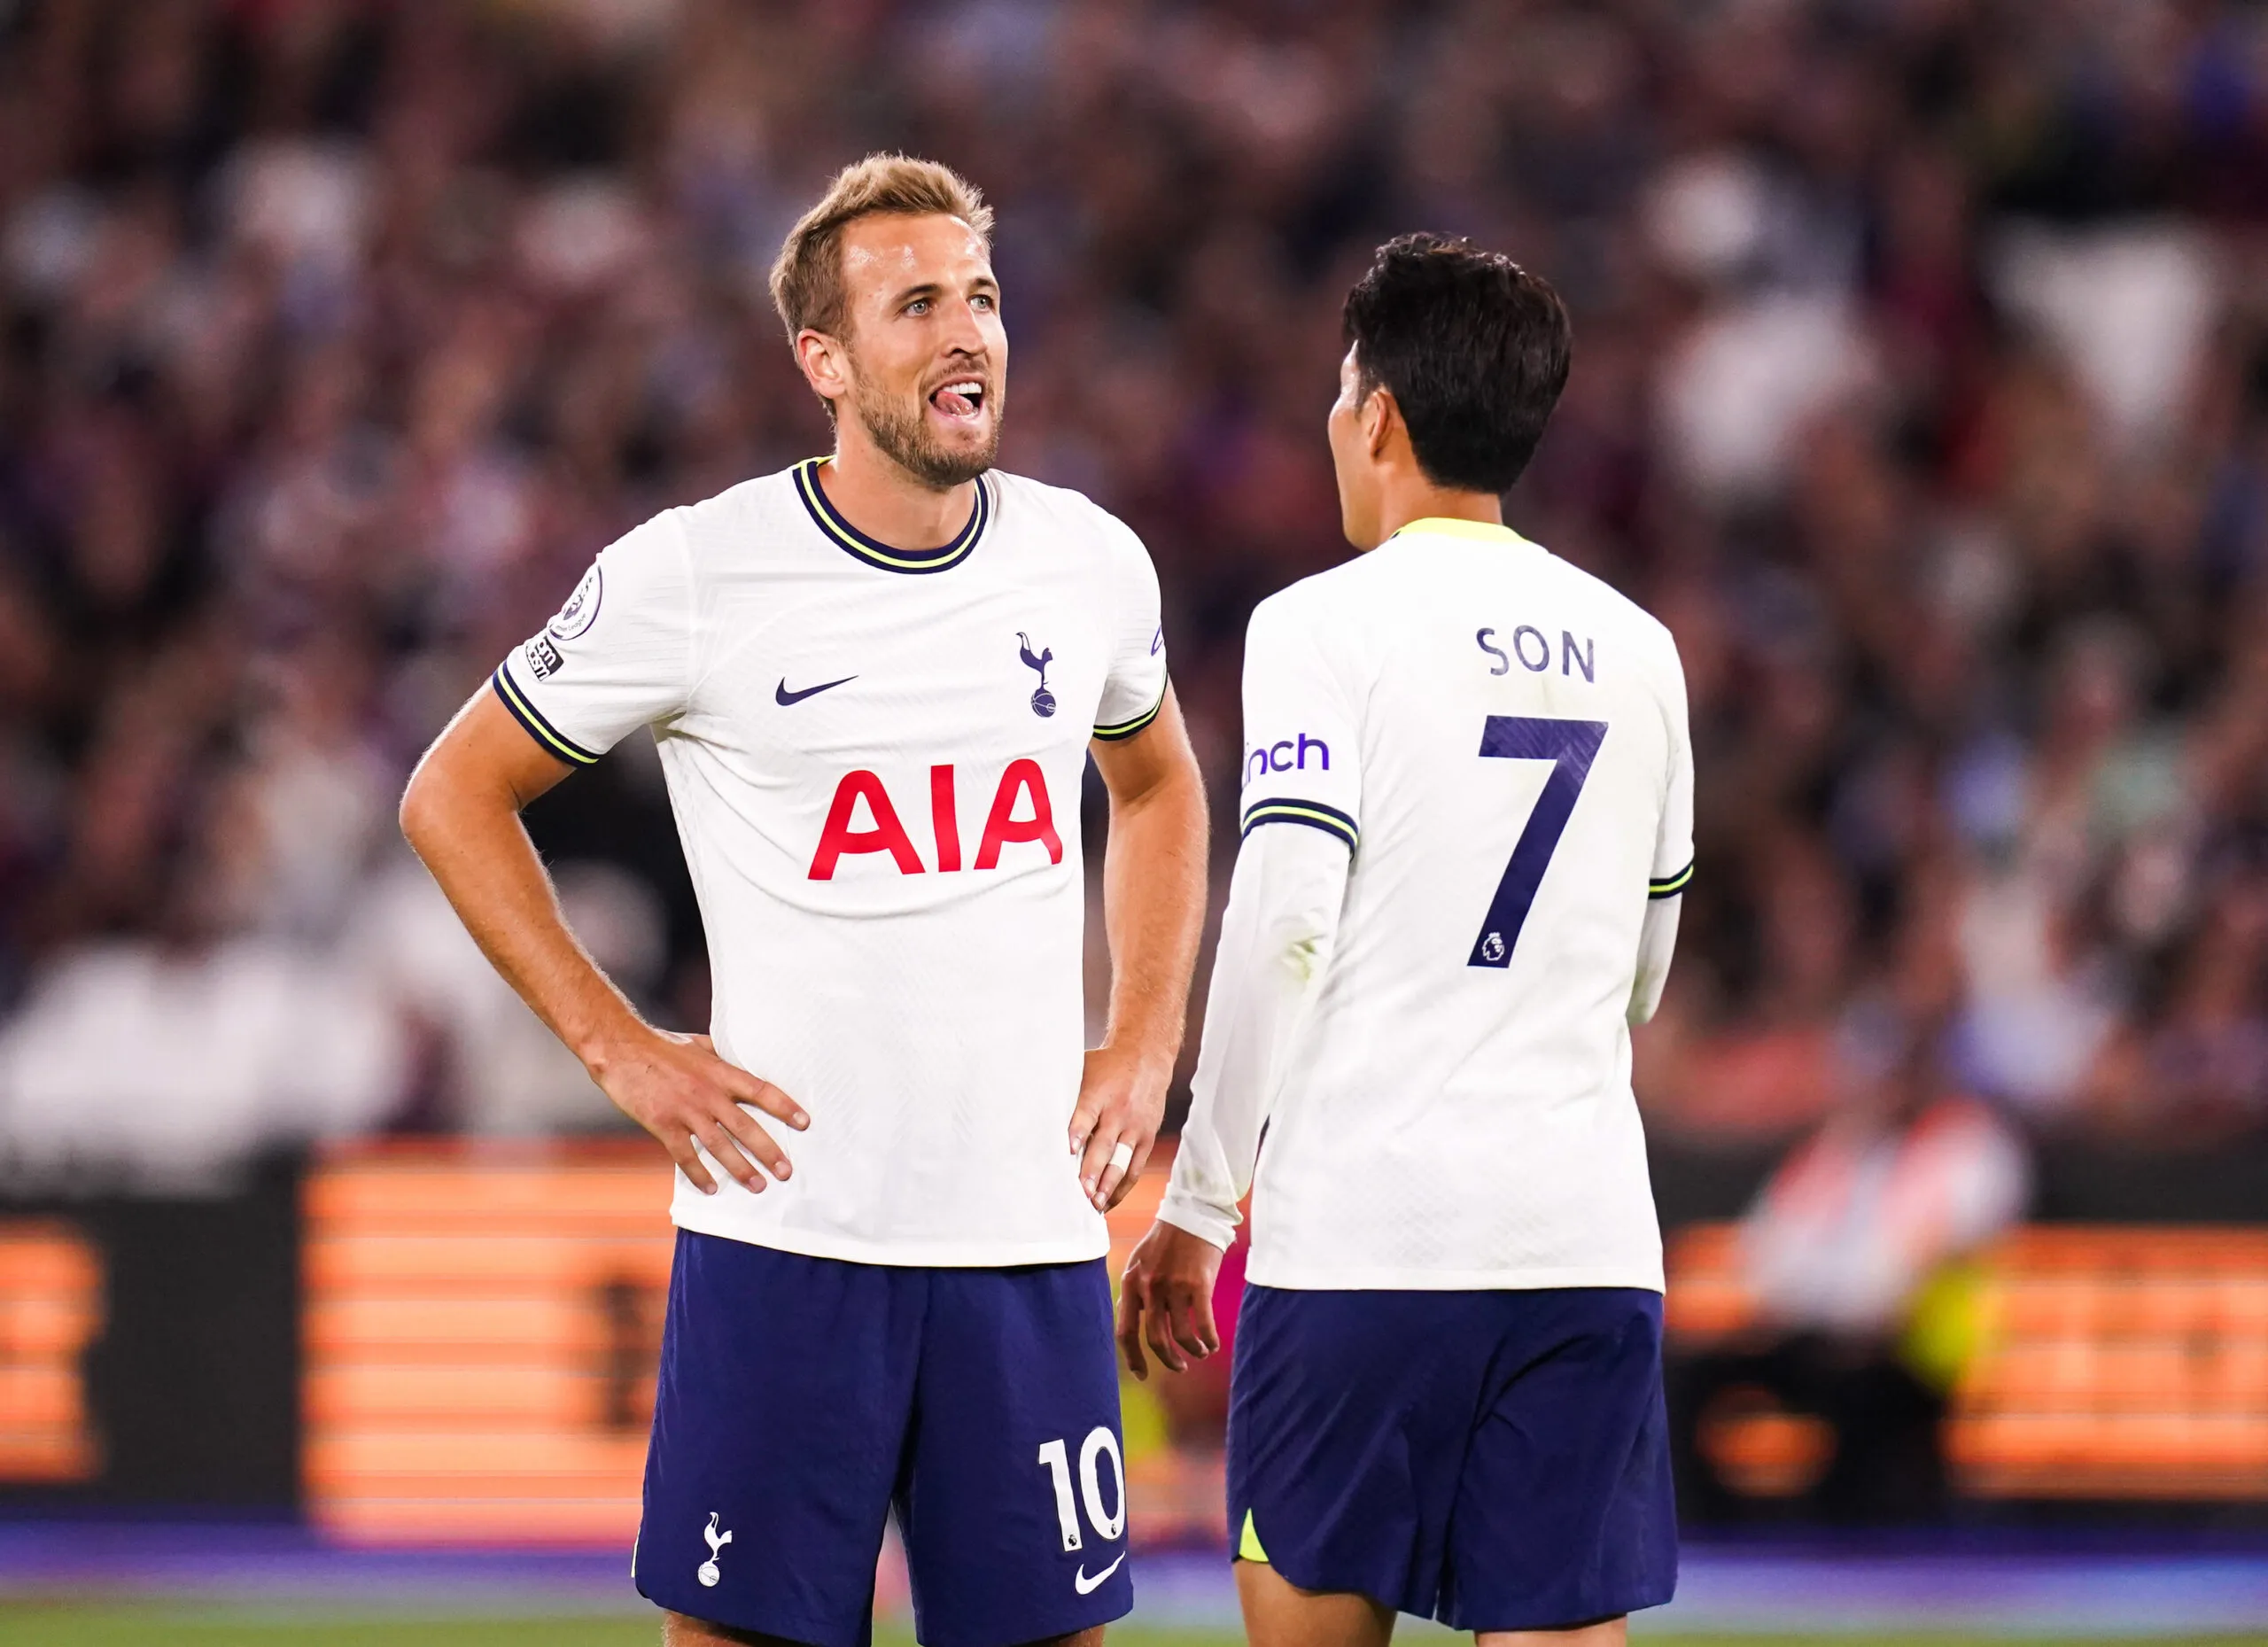 Tottenham Hotspur&rsquo;s Harry Kane (left) and Son Heung-min react during the Premier League match at the London Stadium, London. Picture date: Wednesday August 31, 2022. &#8211; Photo by Icon sport